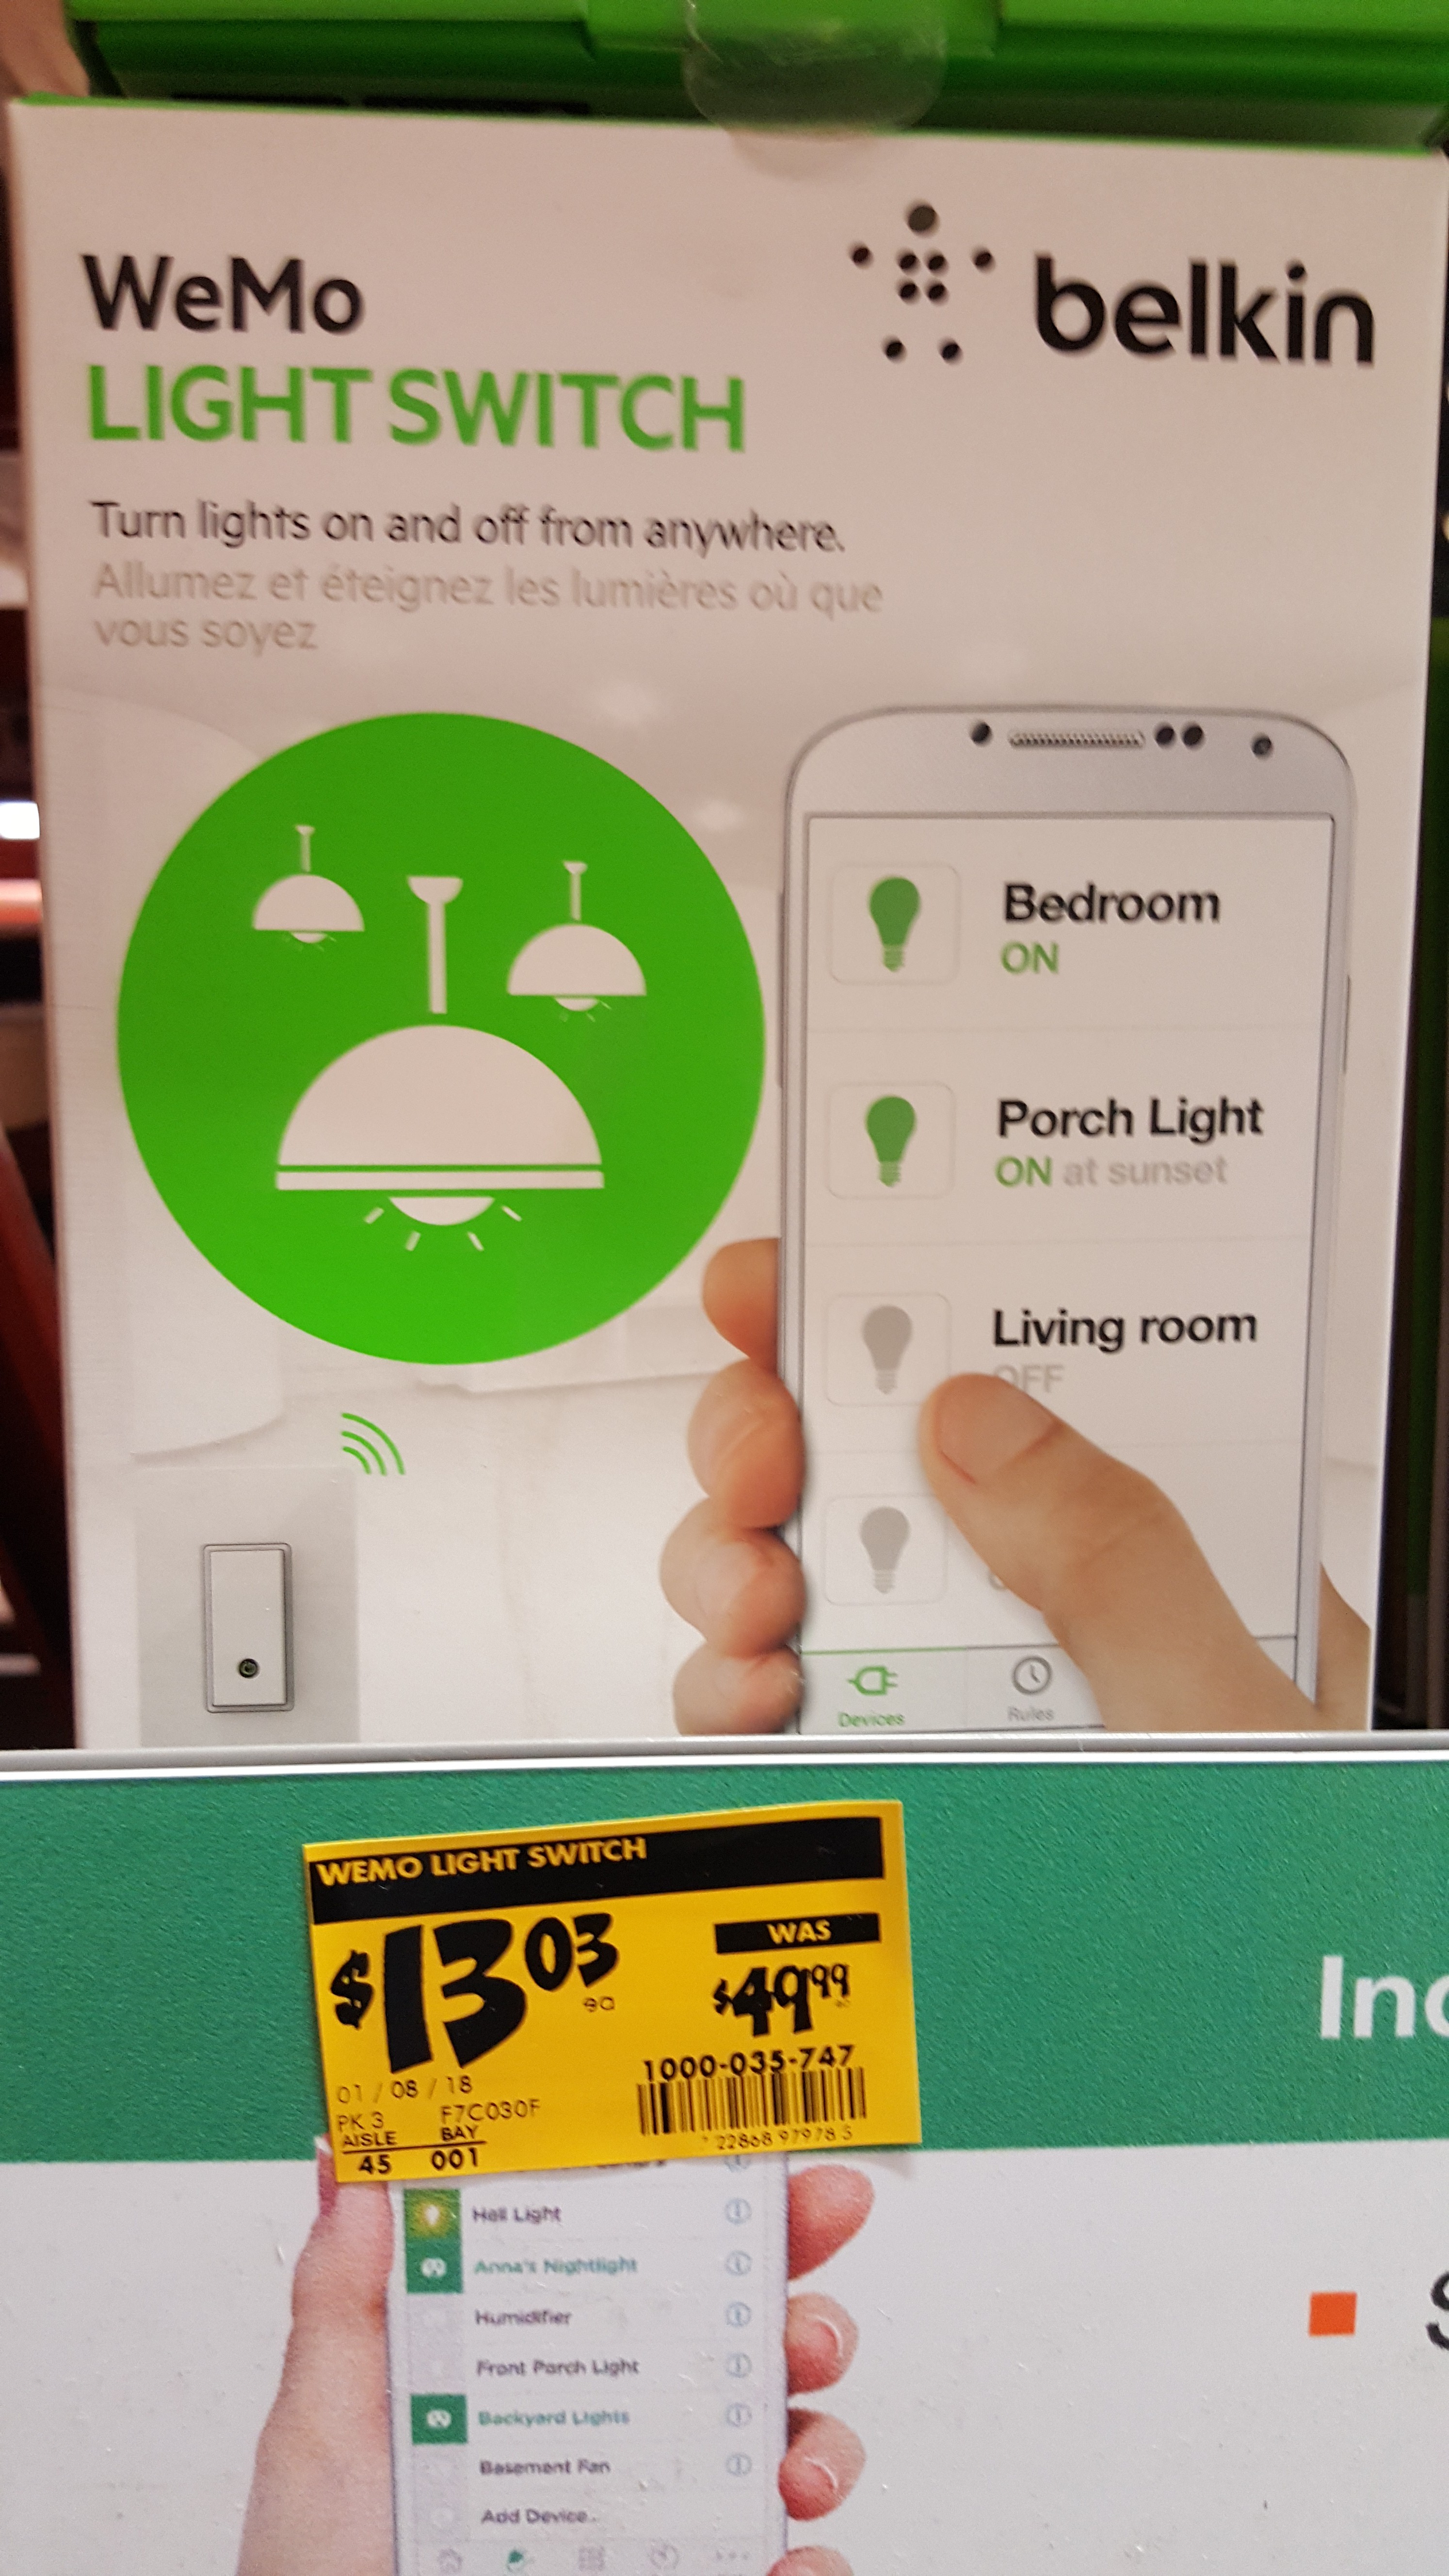 Wemo Light Switch Wi Fi enabled Works with Amazon Alexa and Google